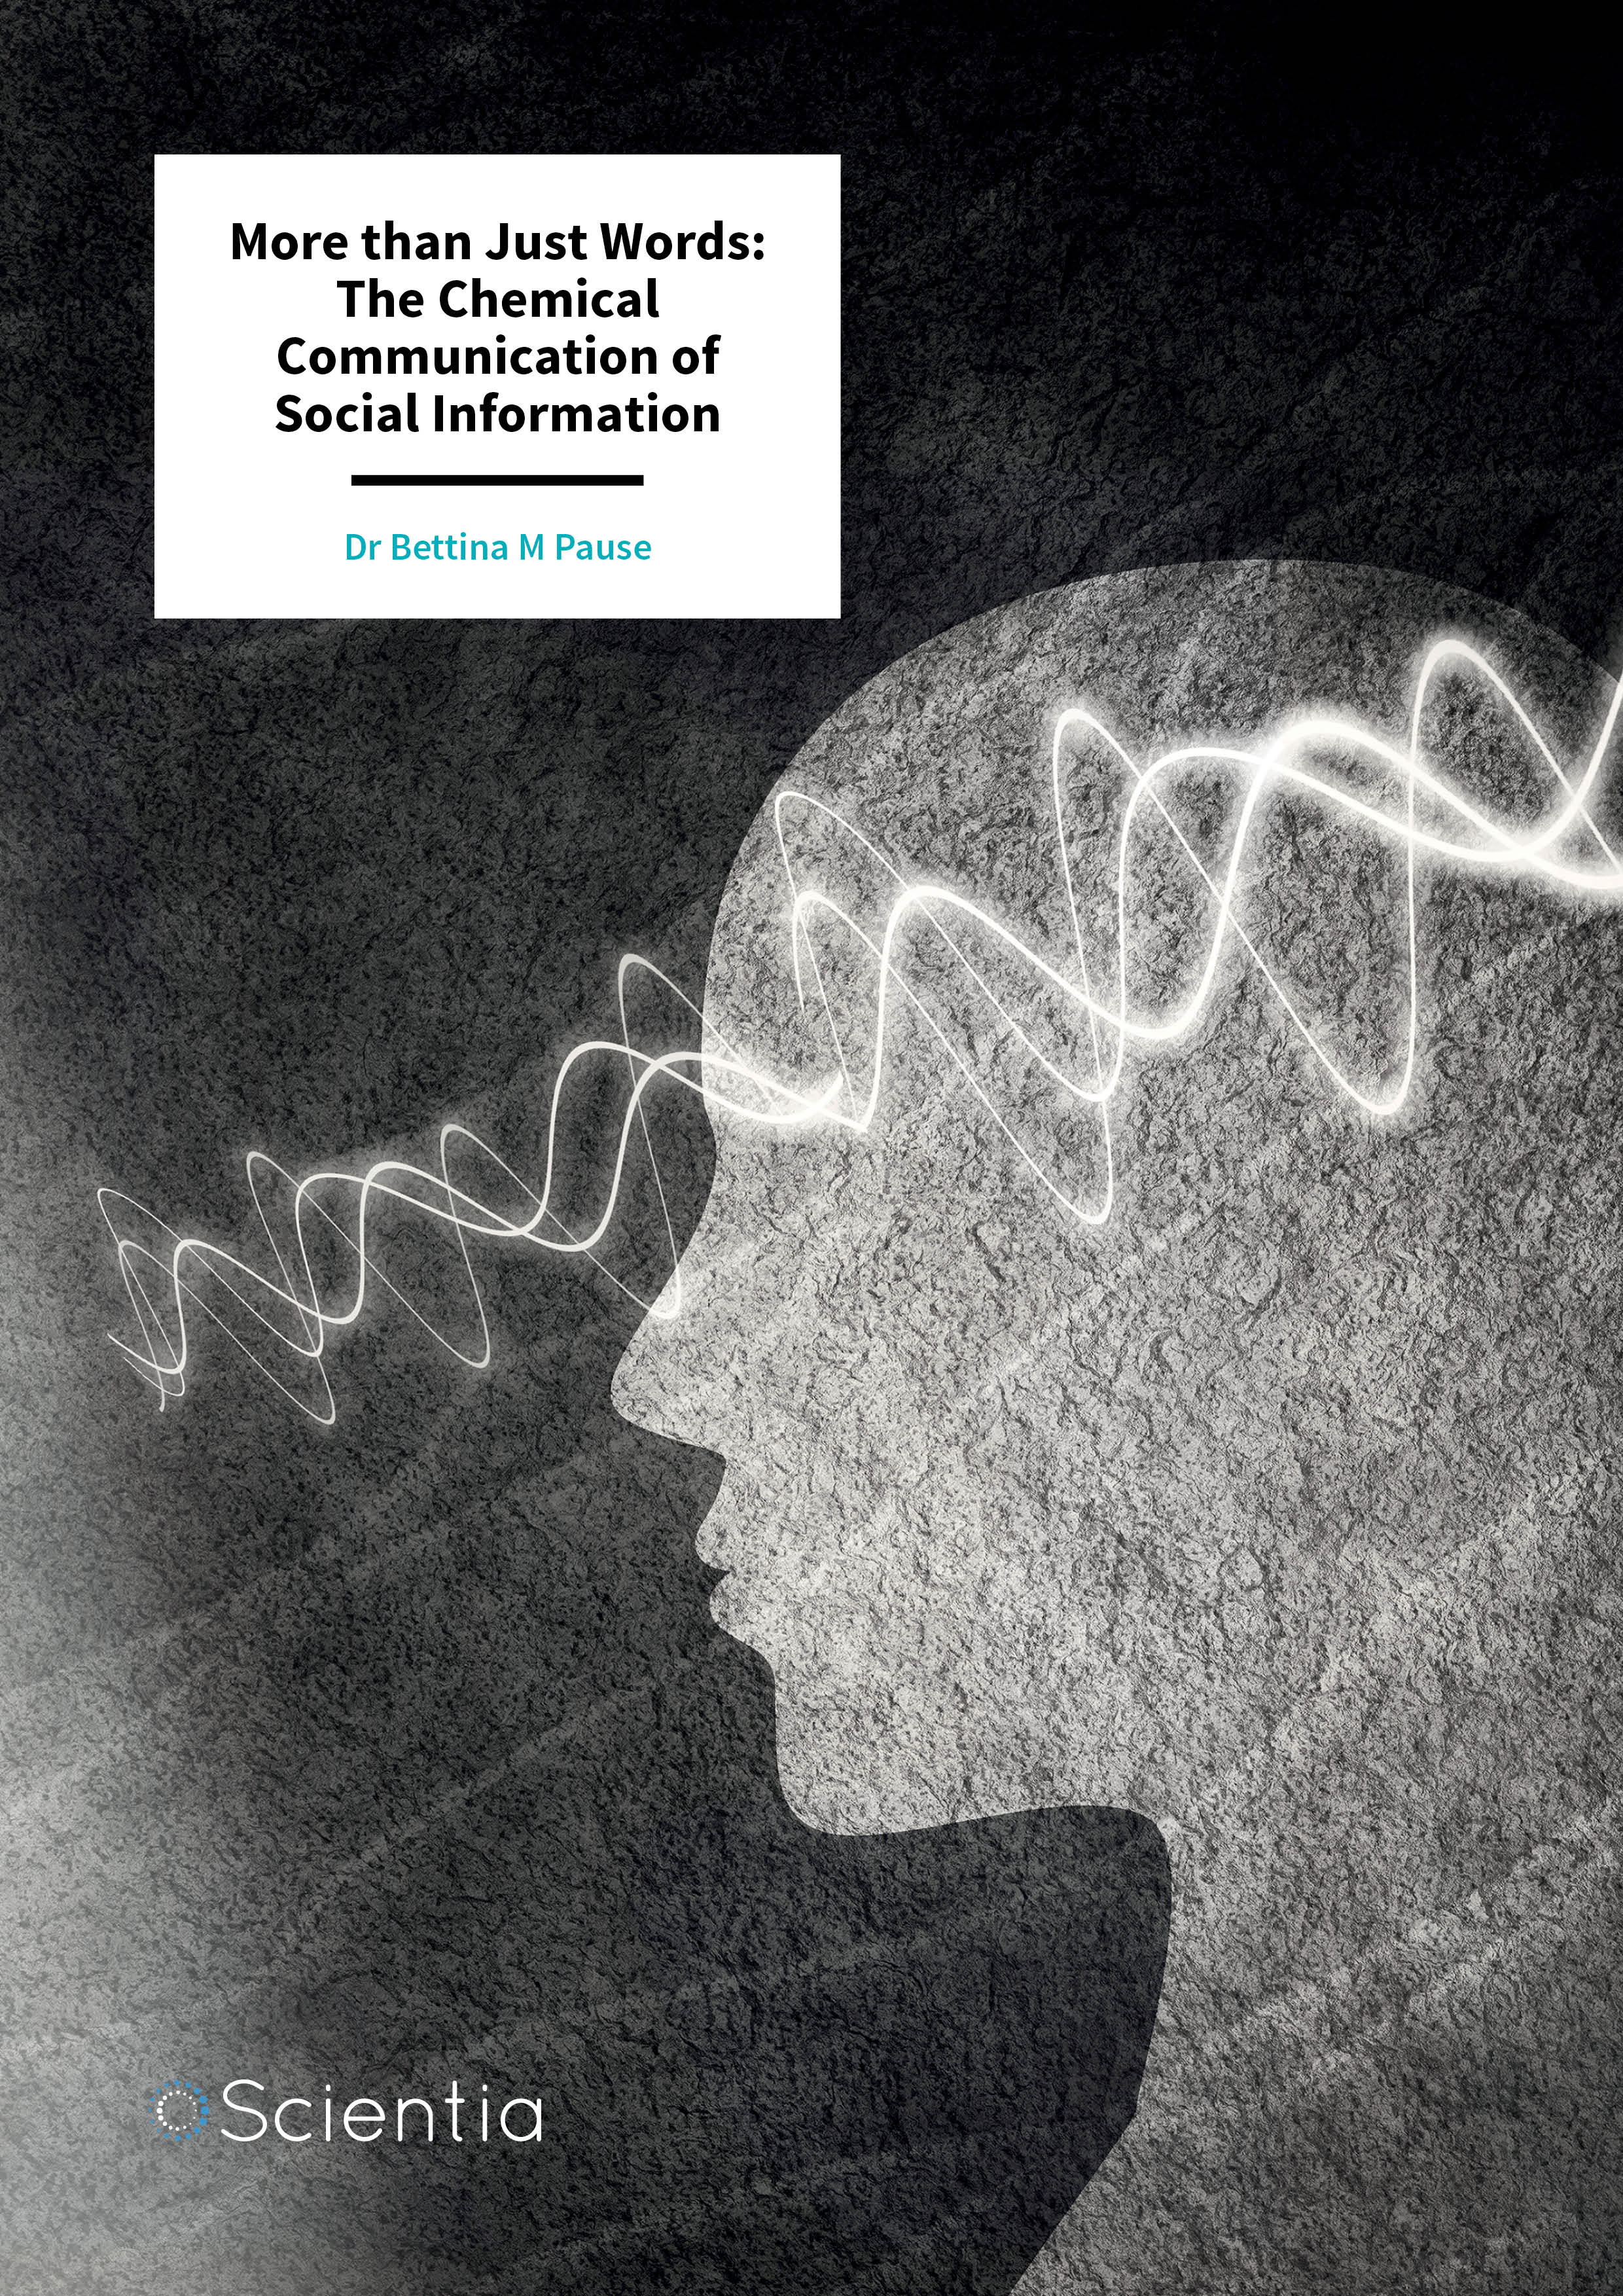 Dr Bettina Pause – More than Just Words: The Chemical Communication of Social Information